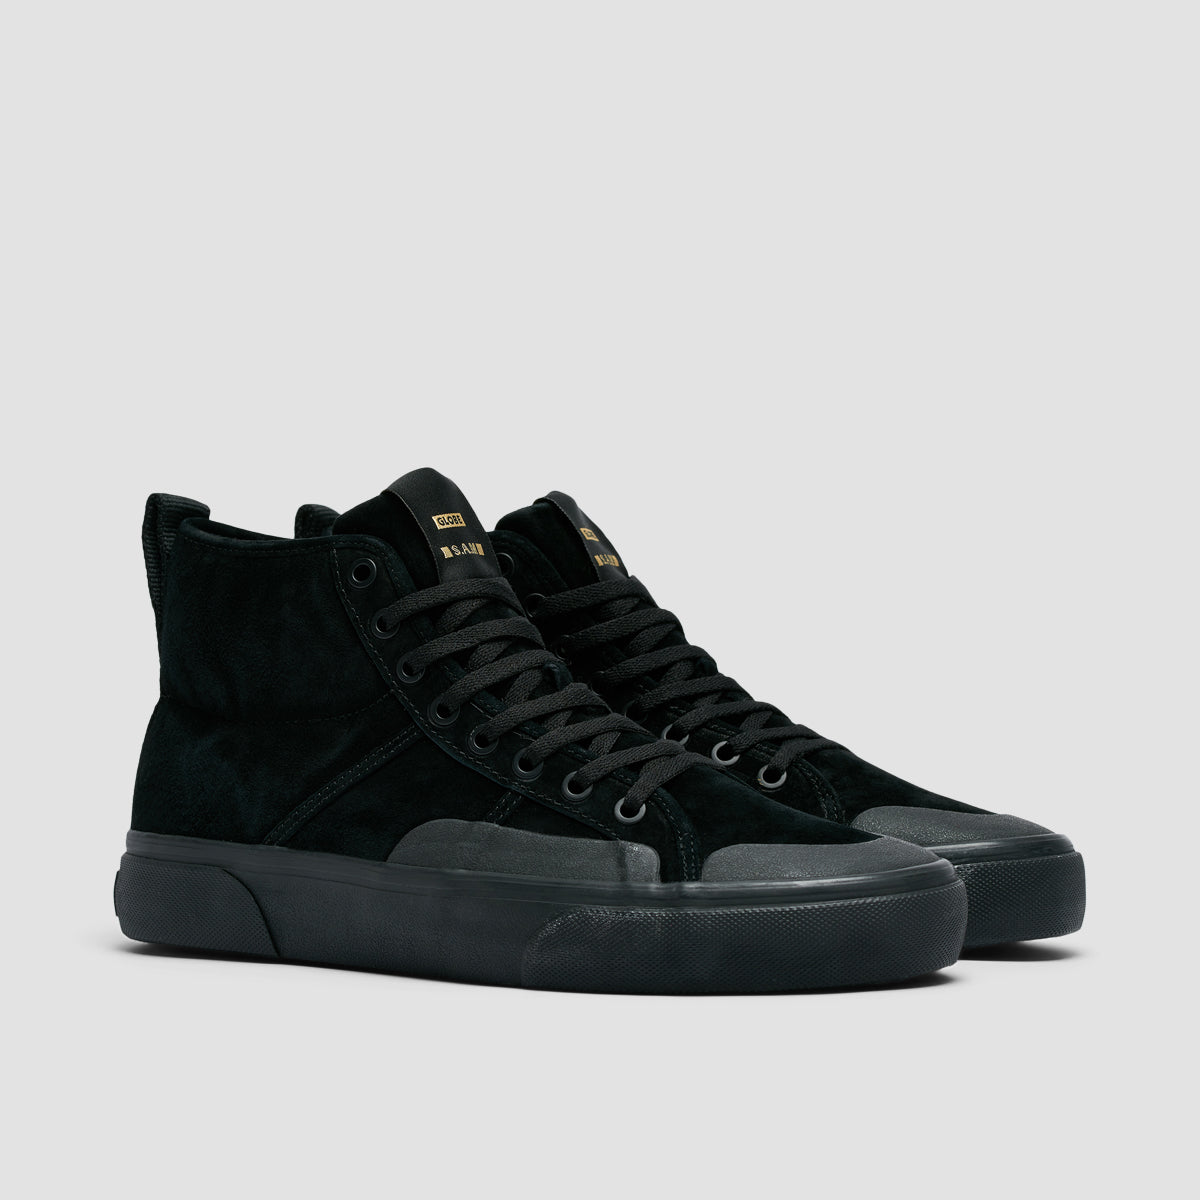 Globe Los Angered II High Top Shoes - Black Wolverine/Montano